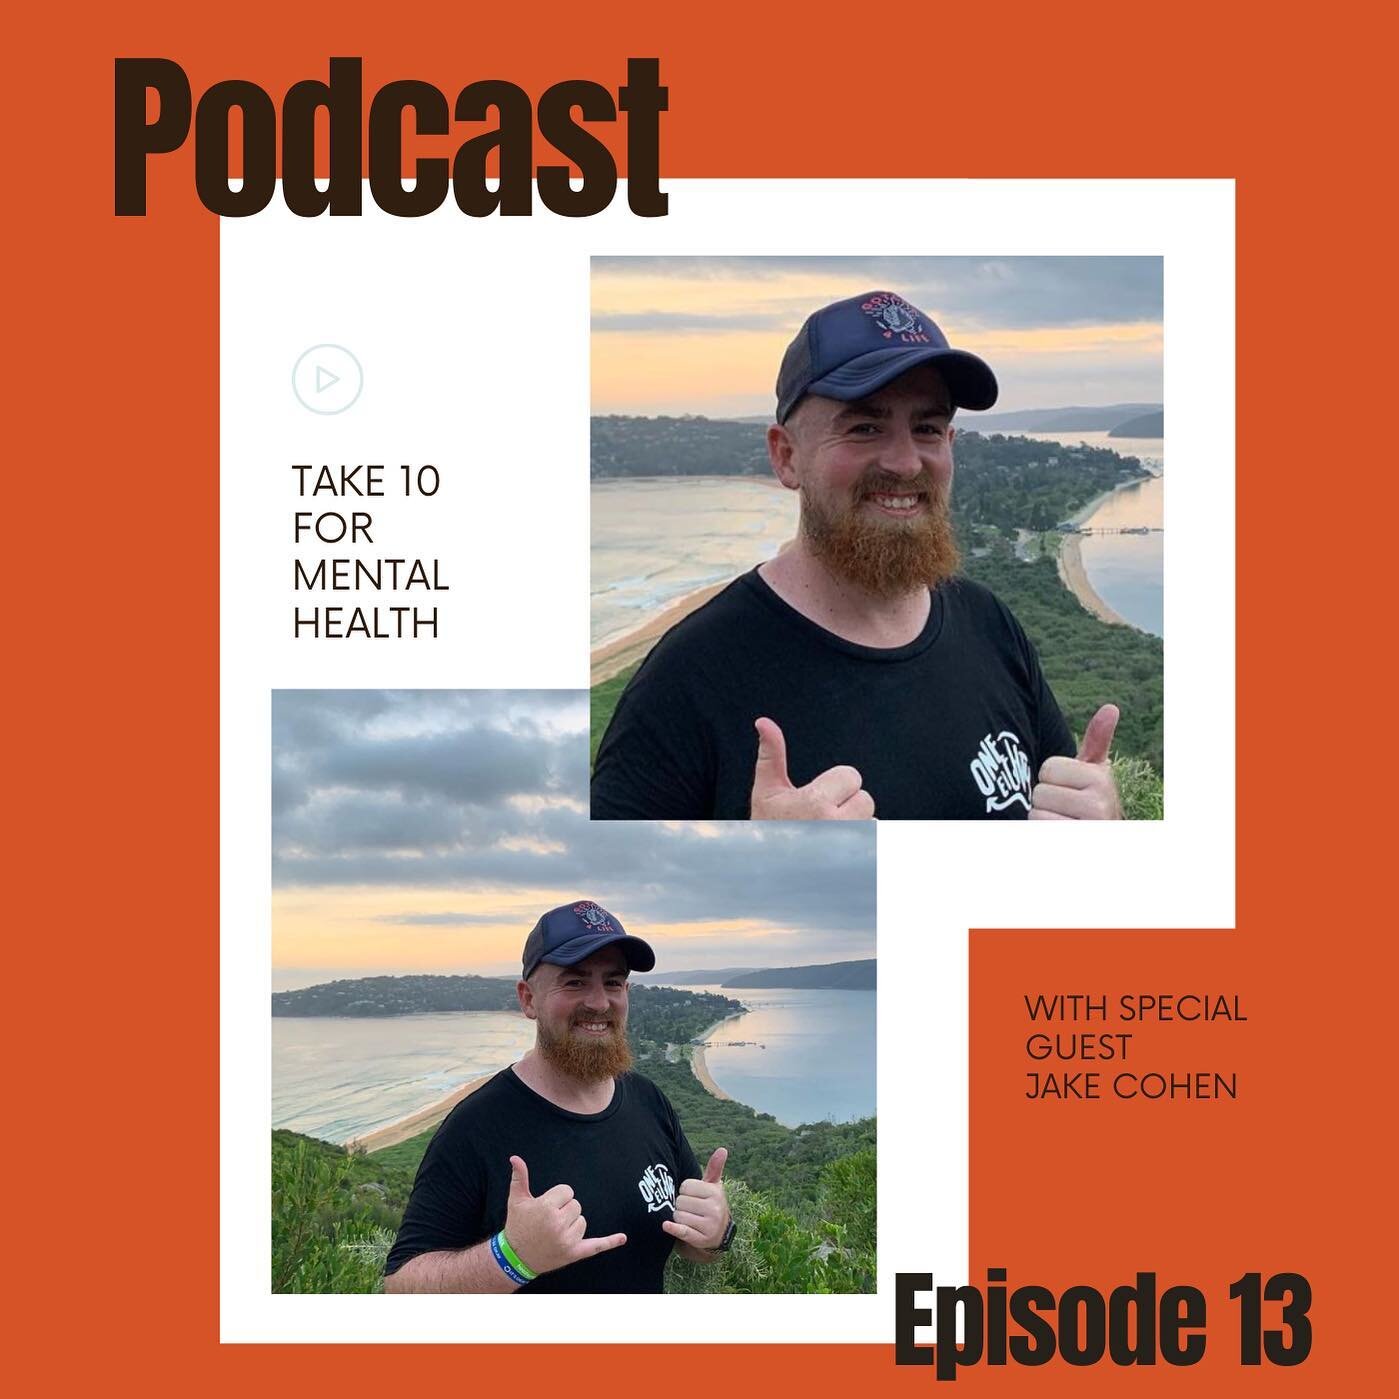 EPISODE 13 IS LIVE!

Jake Cohen is about to embark on a big, big walk.

On Saturday 25 February, he will start his 110km charity trek, from Bondi to Barrenjoey, to raise money and awareness for mental health.

It's not the first time he's taken on th